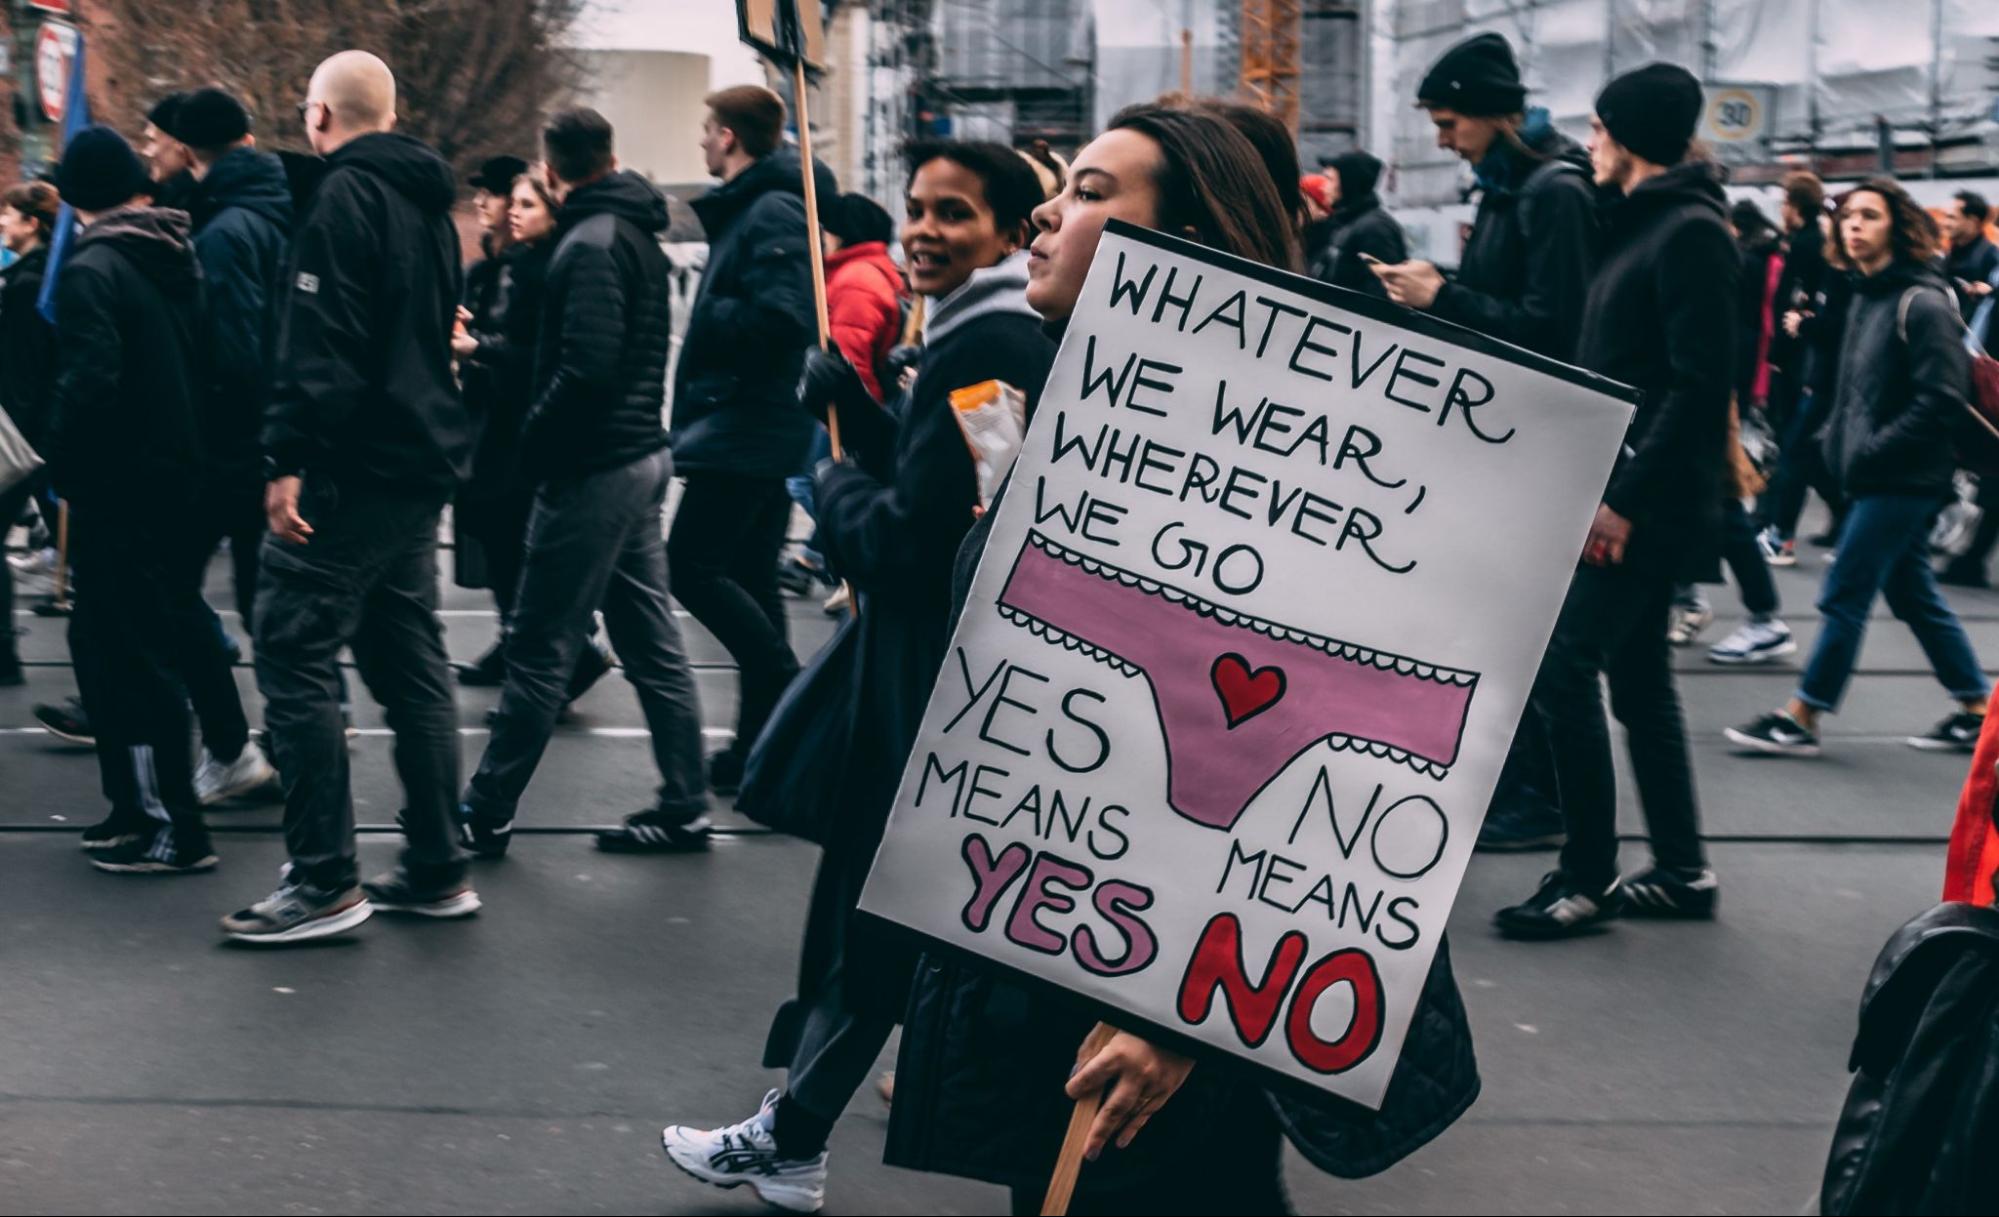 A crowd is walking down a street. One woman holds a sign that reads, " Whatever we wear, wherever we go, yes means yes and no means no."